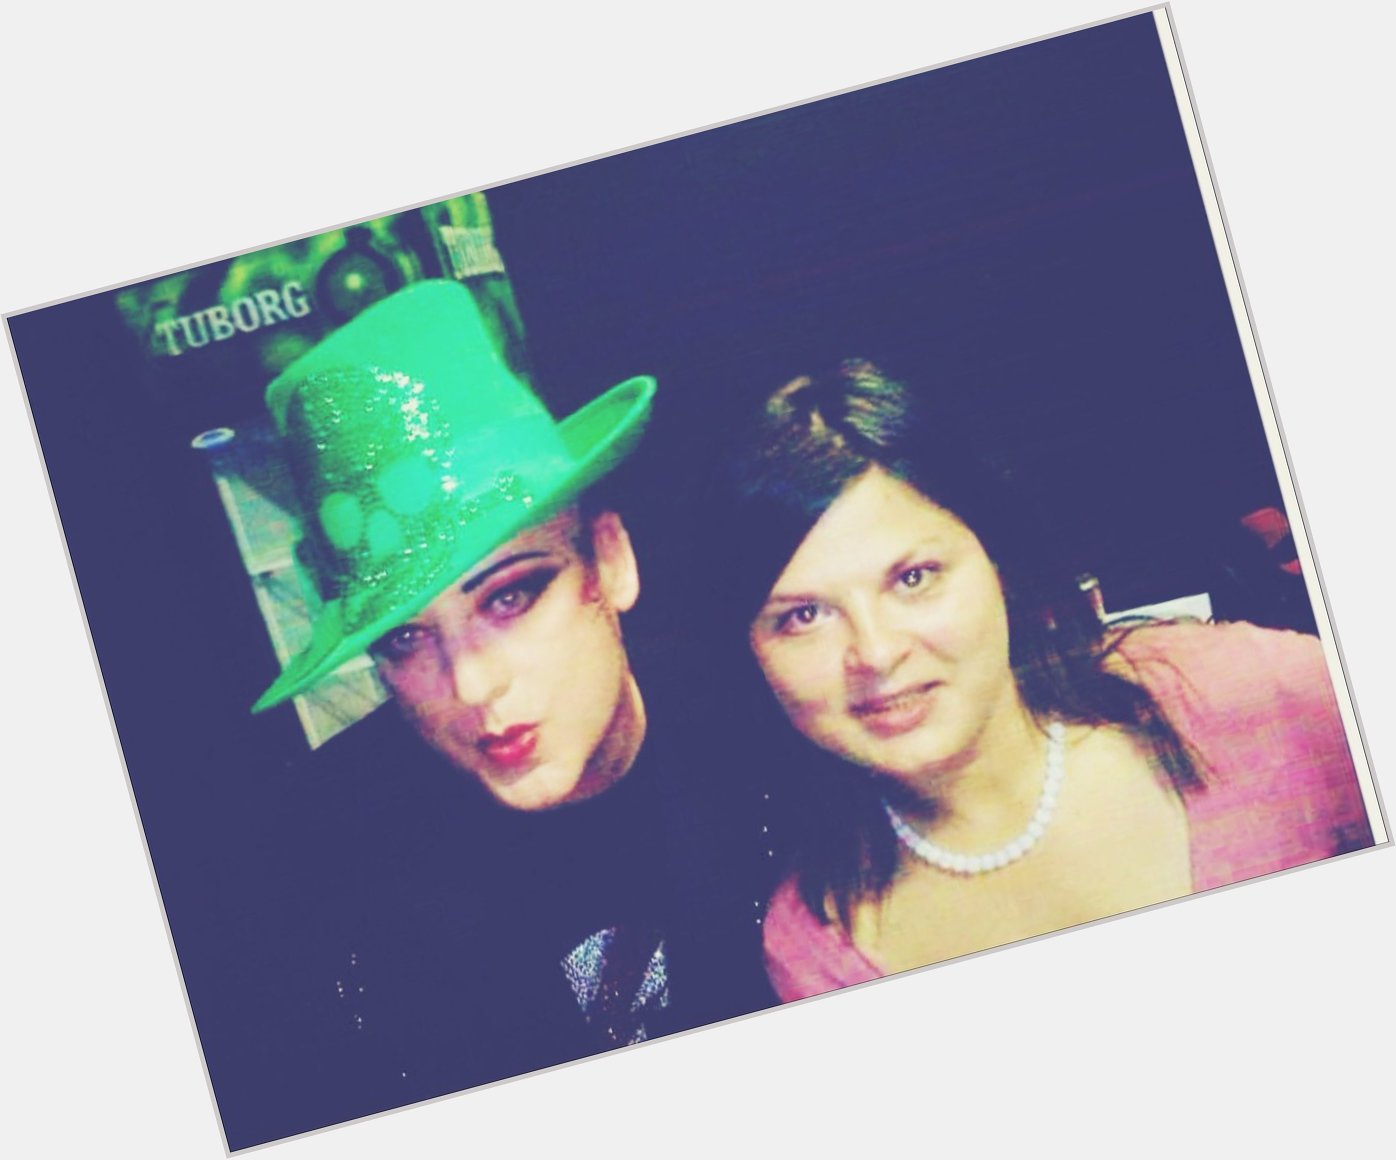   Happy Bday Boy George! My fav is Crying game And this is Foto from June-2010   